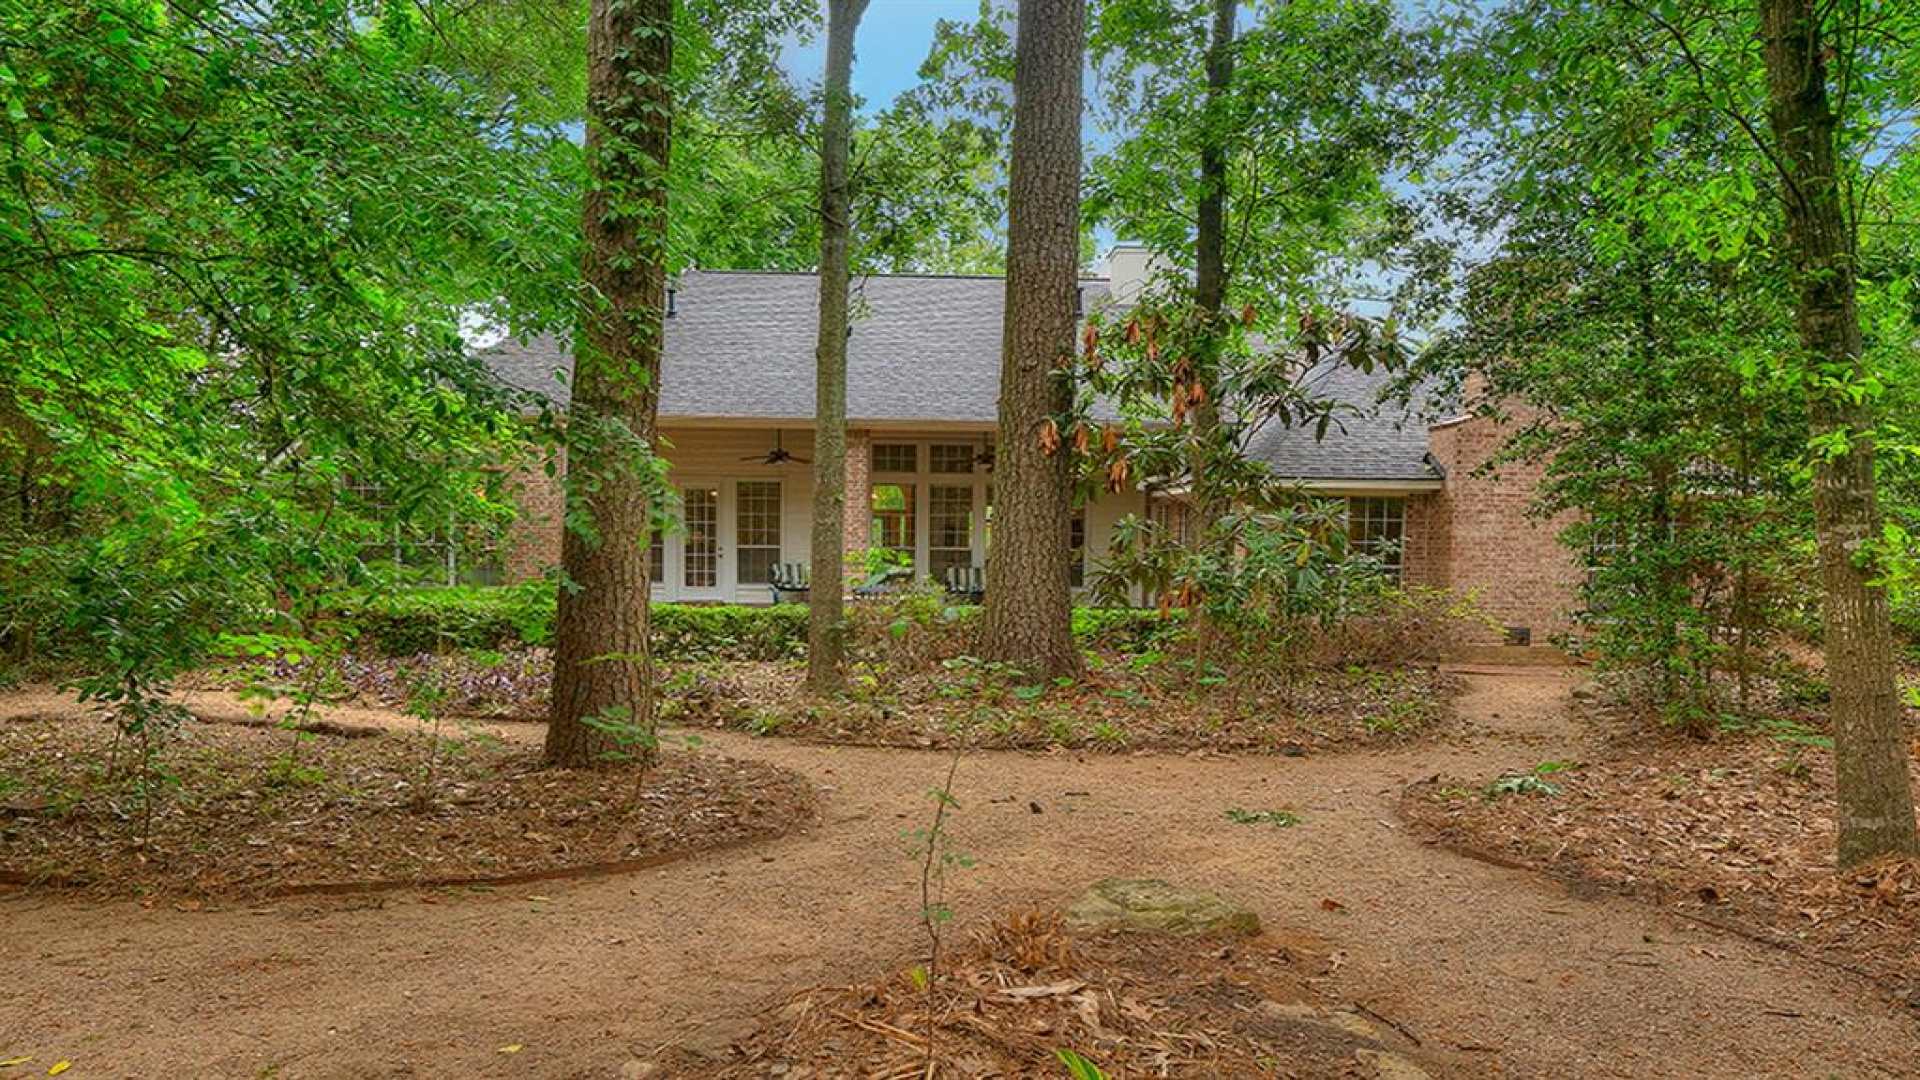 174 Lake View Circle, Conroe, Texas 77356, 4 Bedrooms Bedrooms, ,3 BathroomsBathrooms,Single Family,For Sale,Lake View Circle,1009